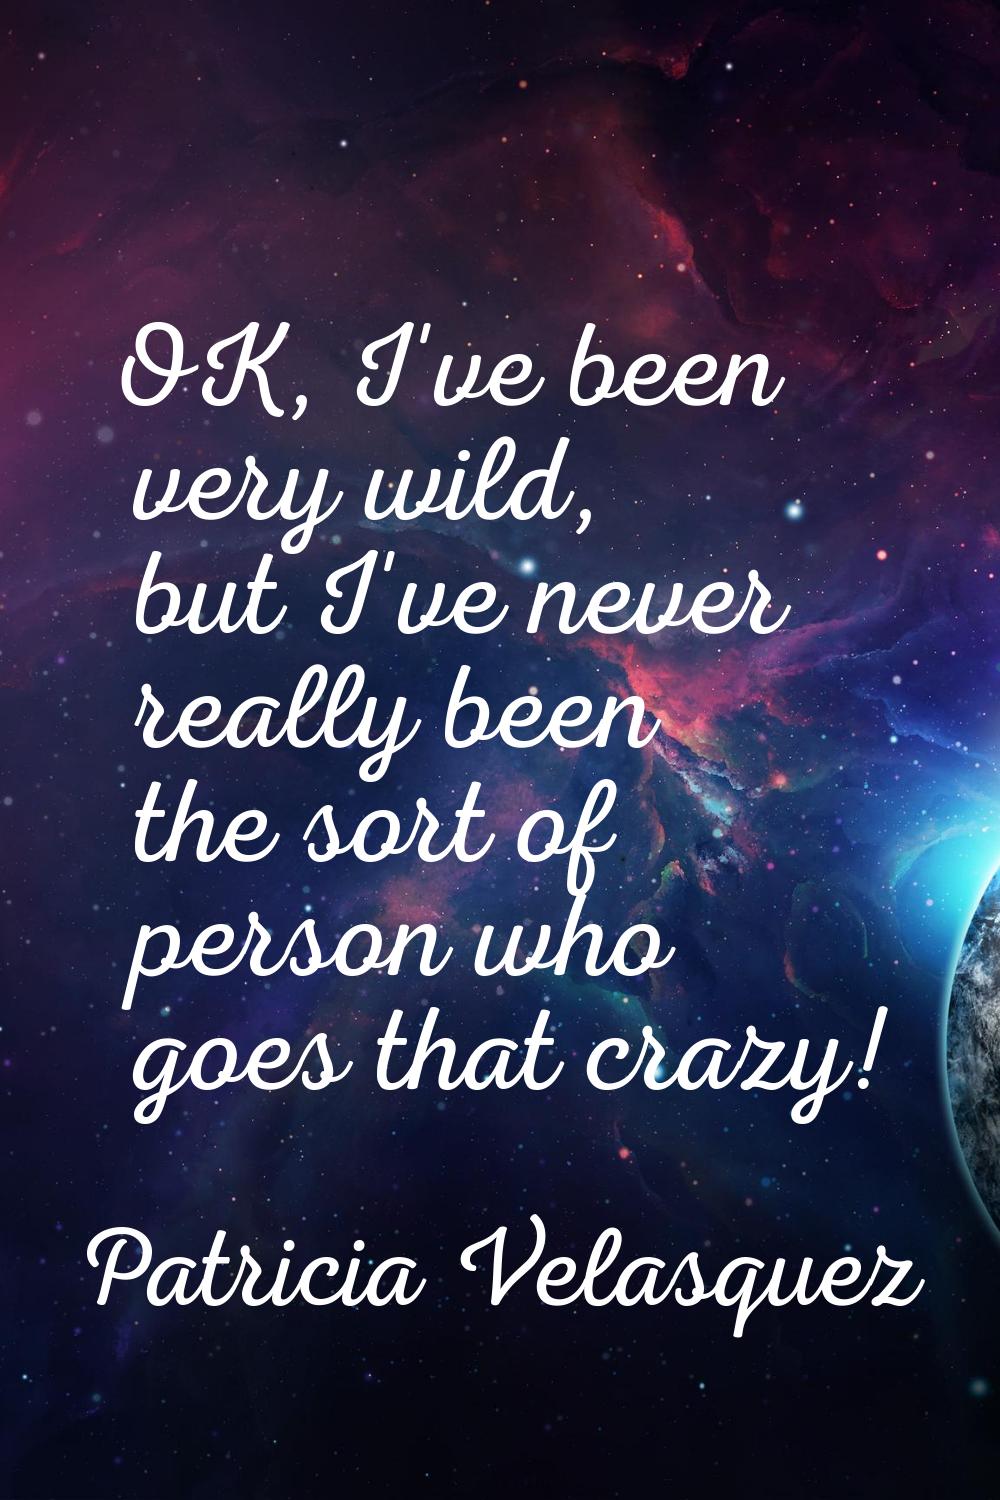 OK, I've been very wild, but I've never really been the sort of person who goes that crazy!